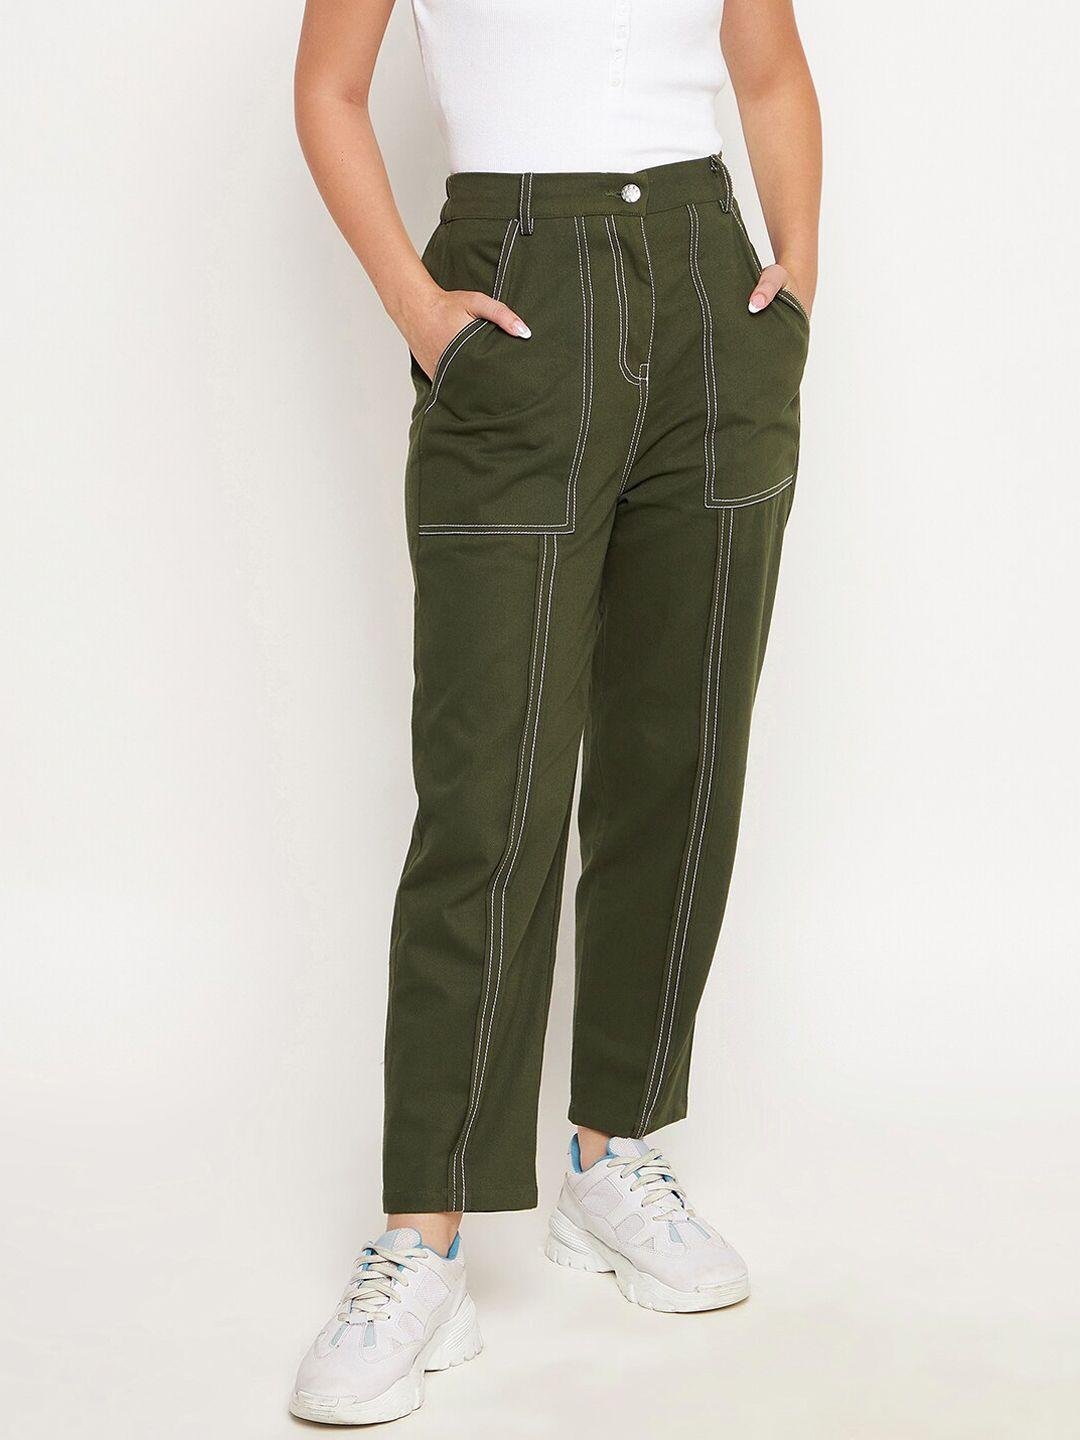 winered-women-olive-green-relaxed-high-rise-easy-wash-trouser